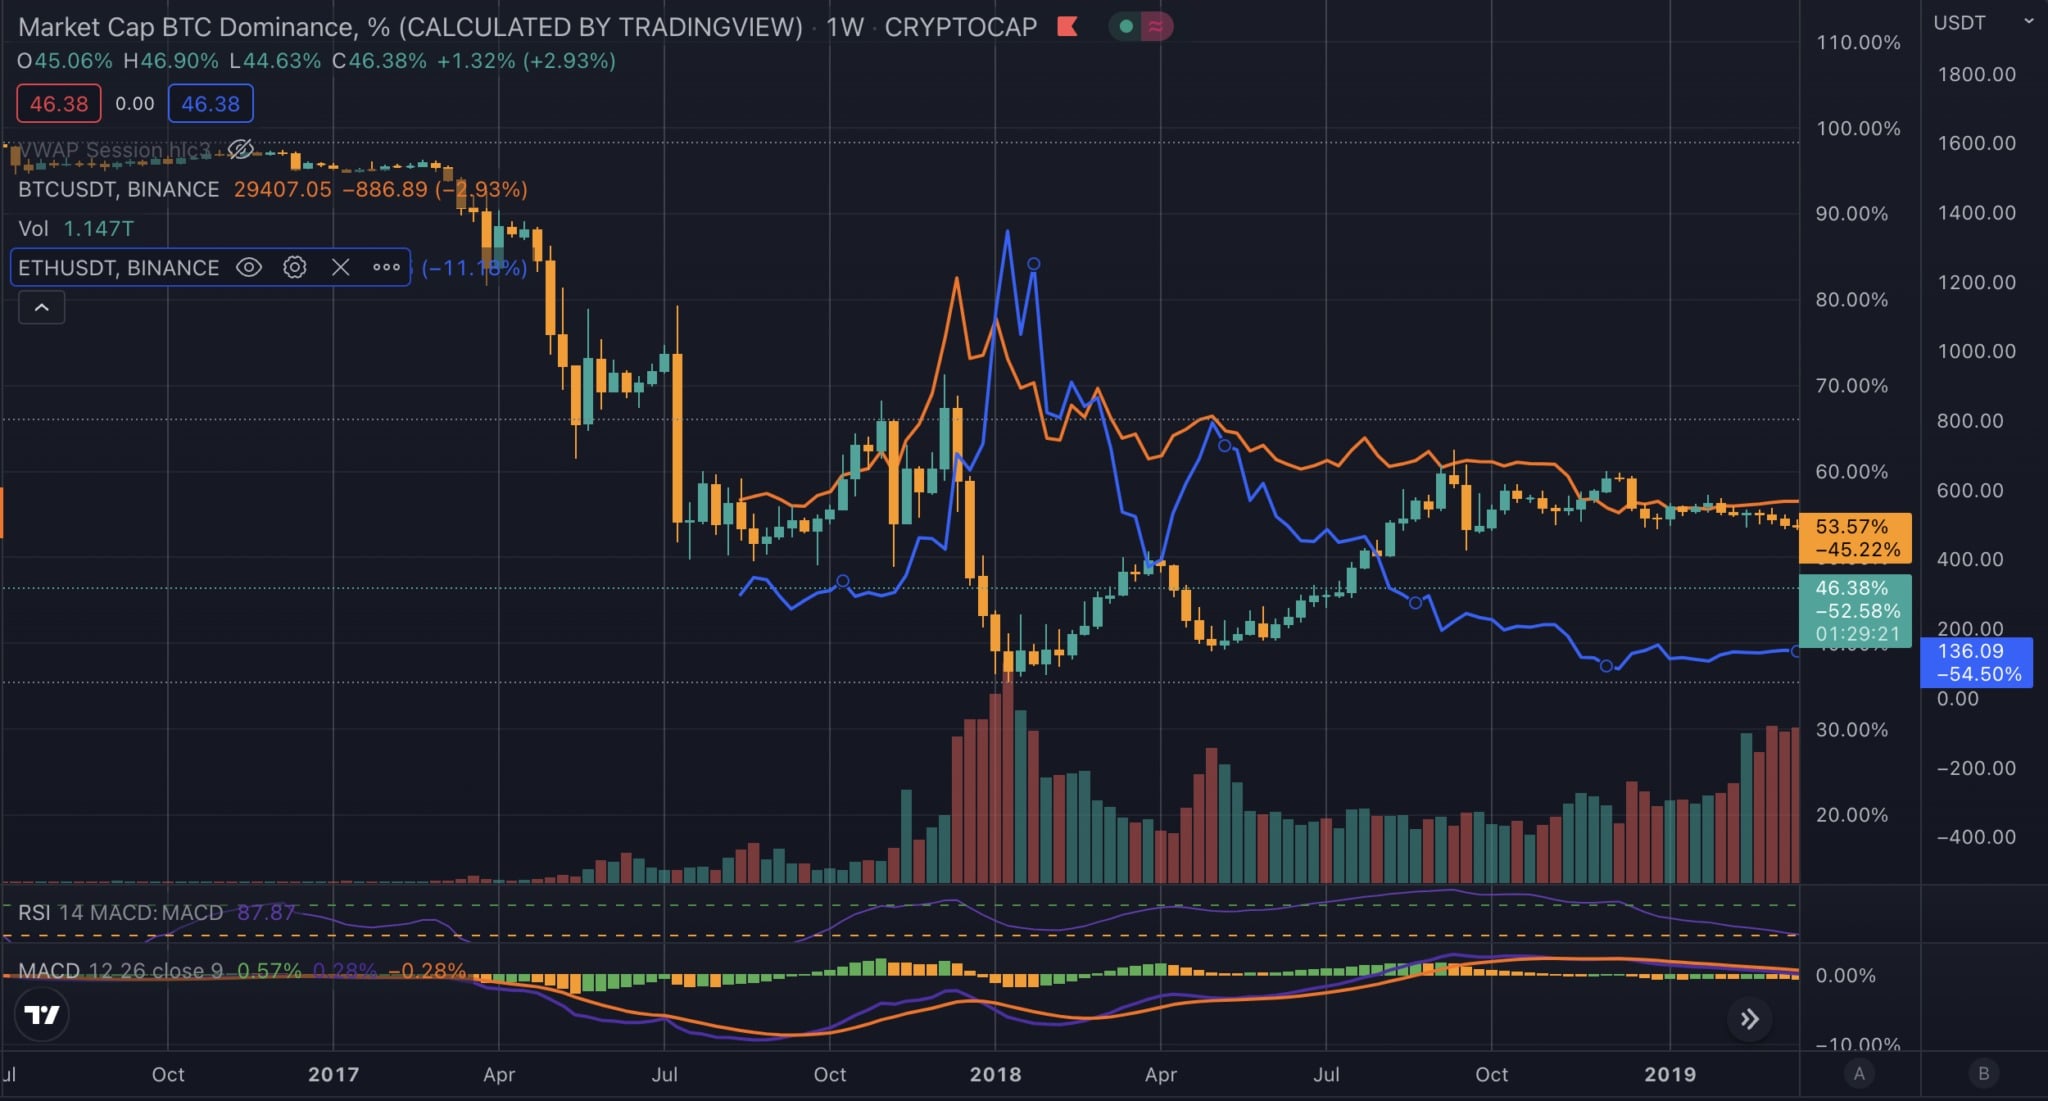 Fuente: Chart on TradingView